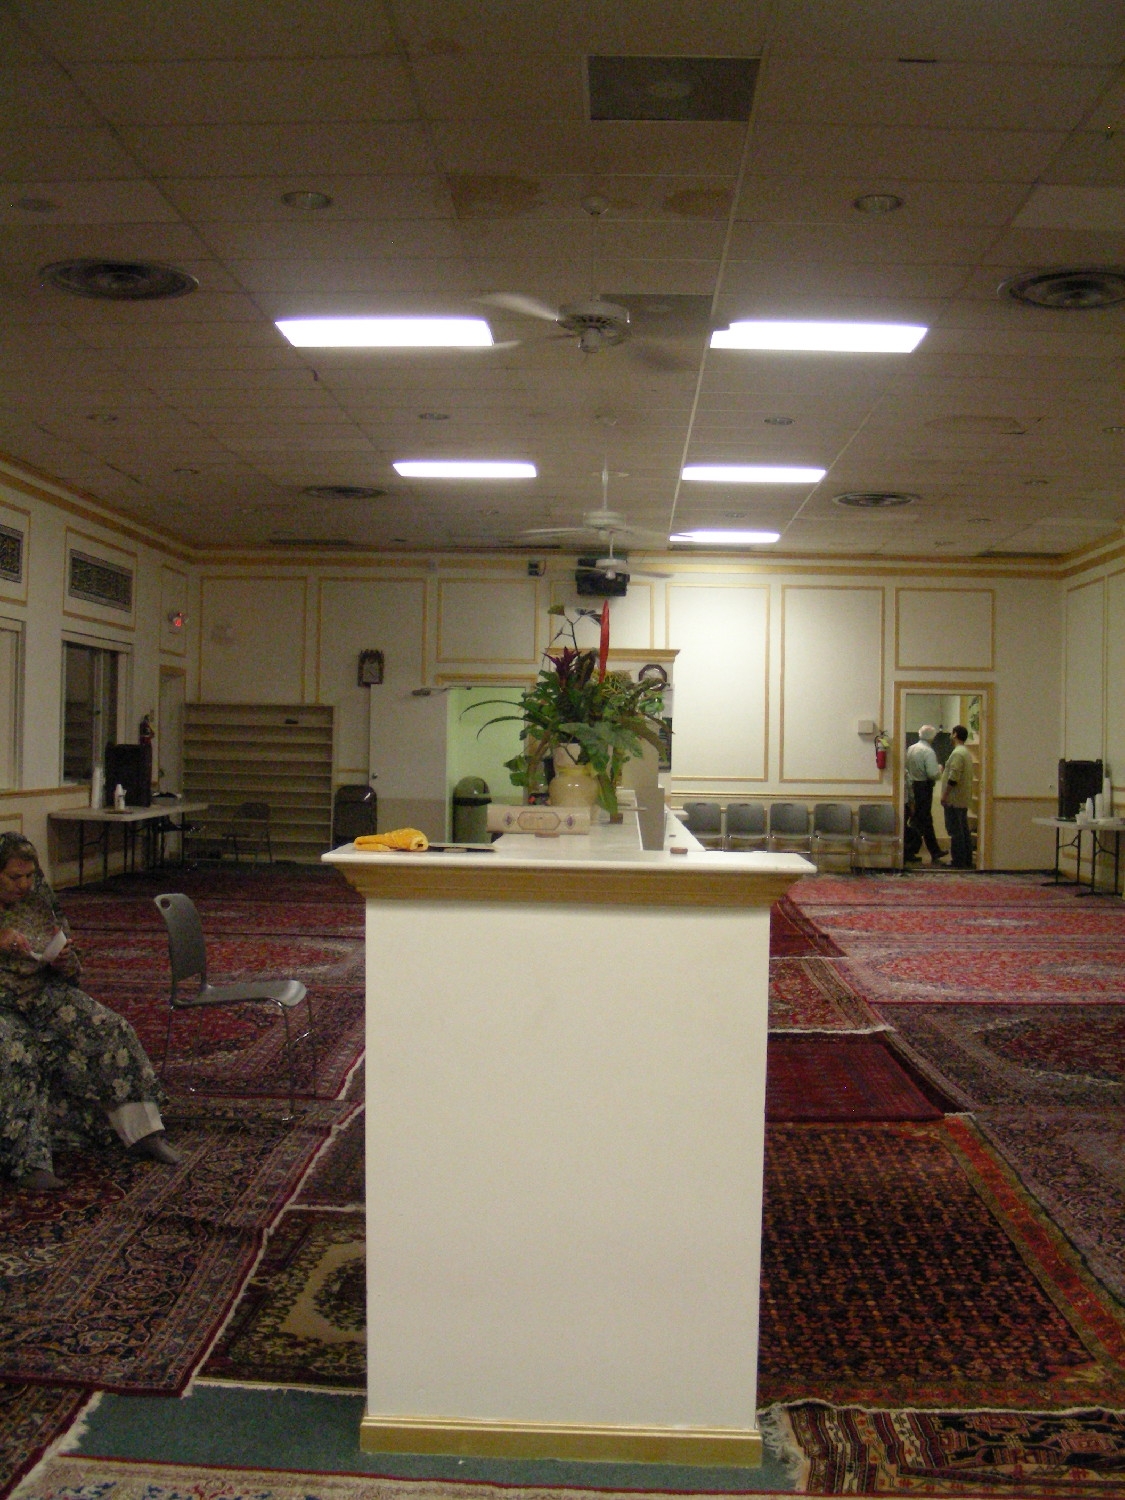 Prayer hall, looking away from qibla wall, showing divider between men's and women's sections